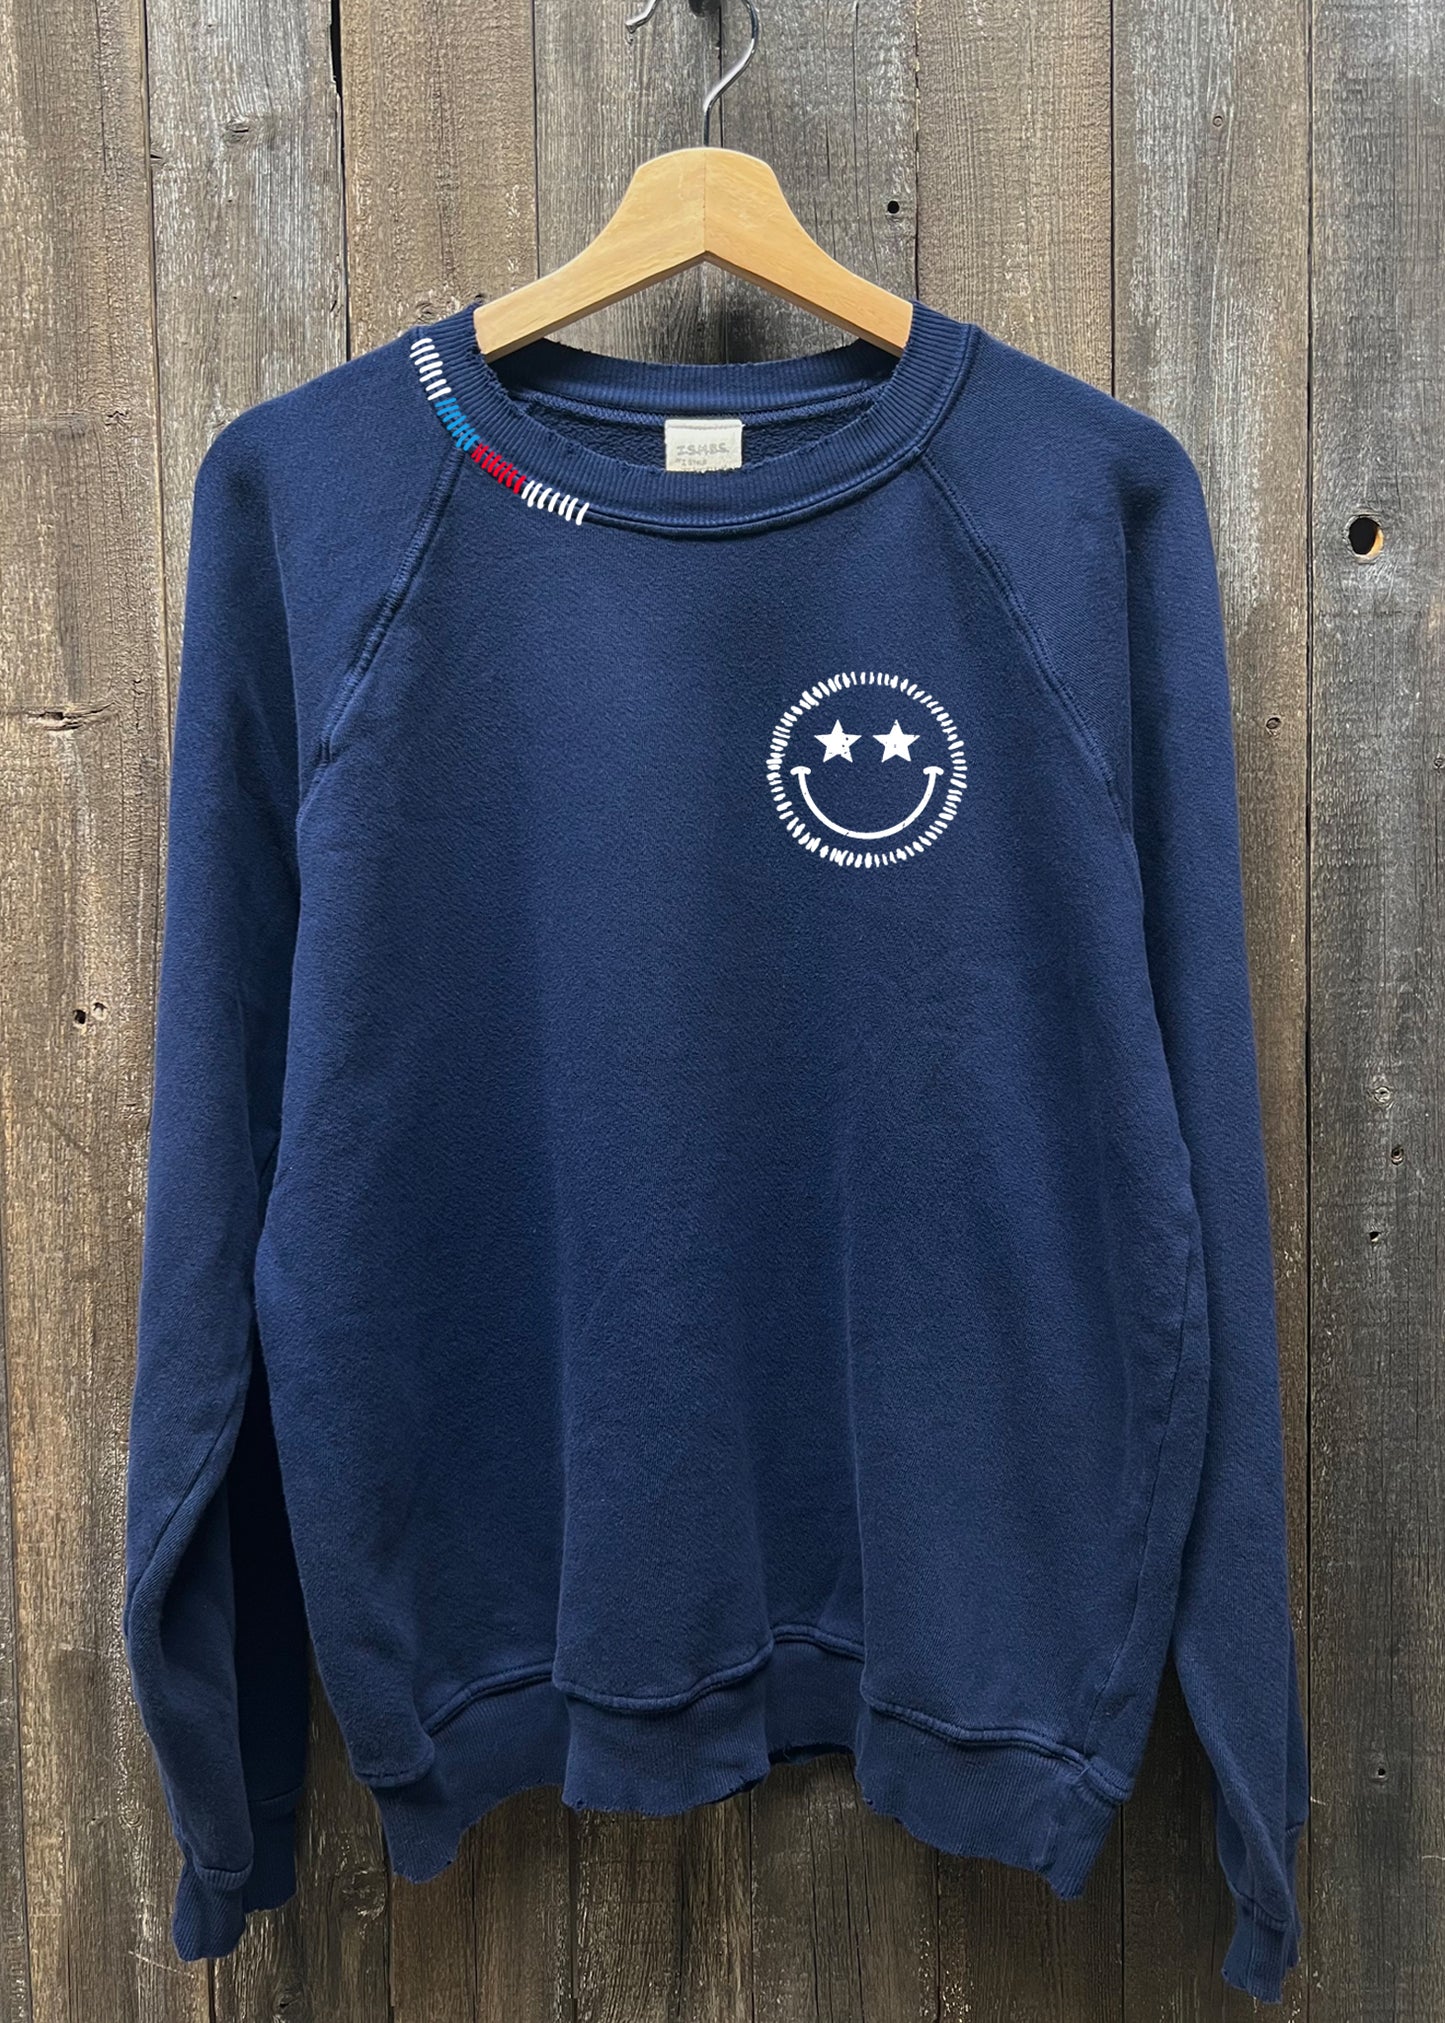 July Fourth Smiley Sweatshirt(5 Colors)